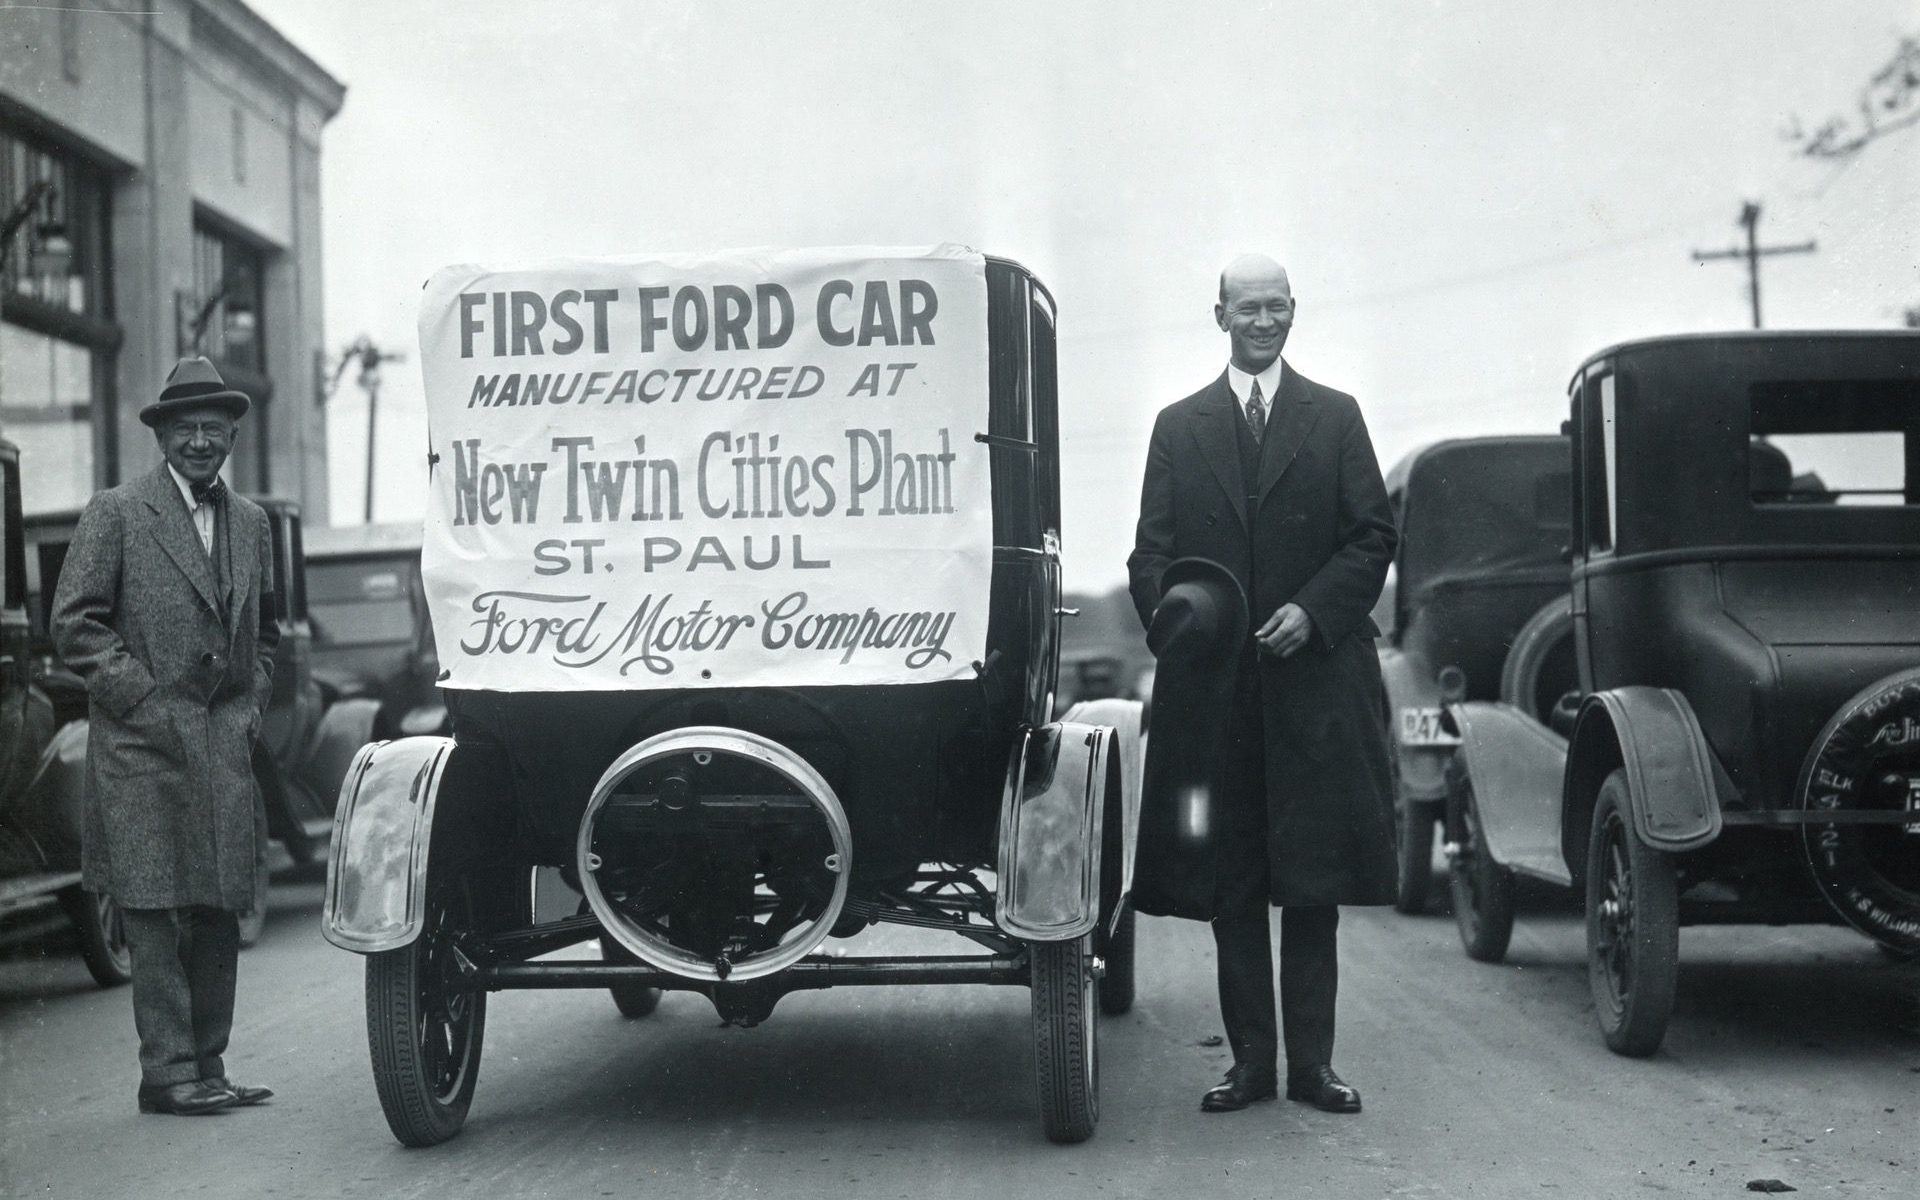 The first Model T rolled off the assembly line on May 4, 1925. The plant’s opening generated tremendous excitement within the business community, whose leaders expected it to generate a big boost for the local economy. Courtesy Minnesota Historical Society